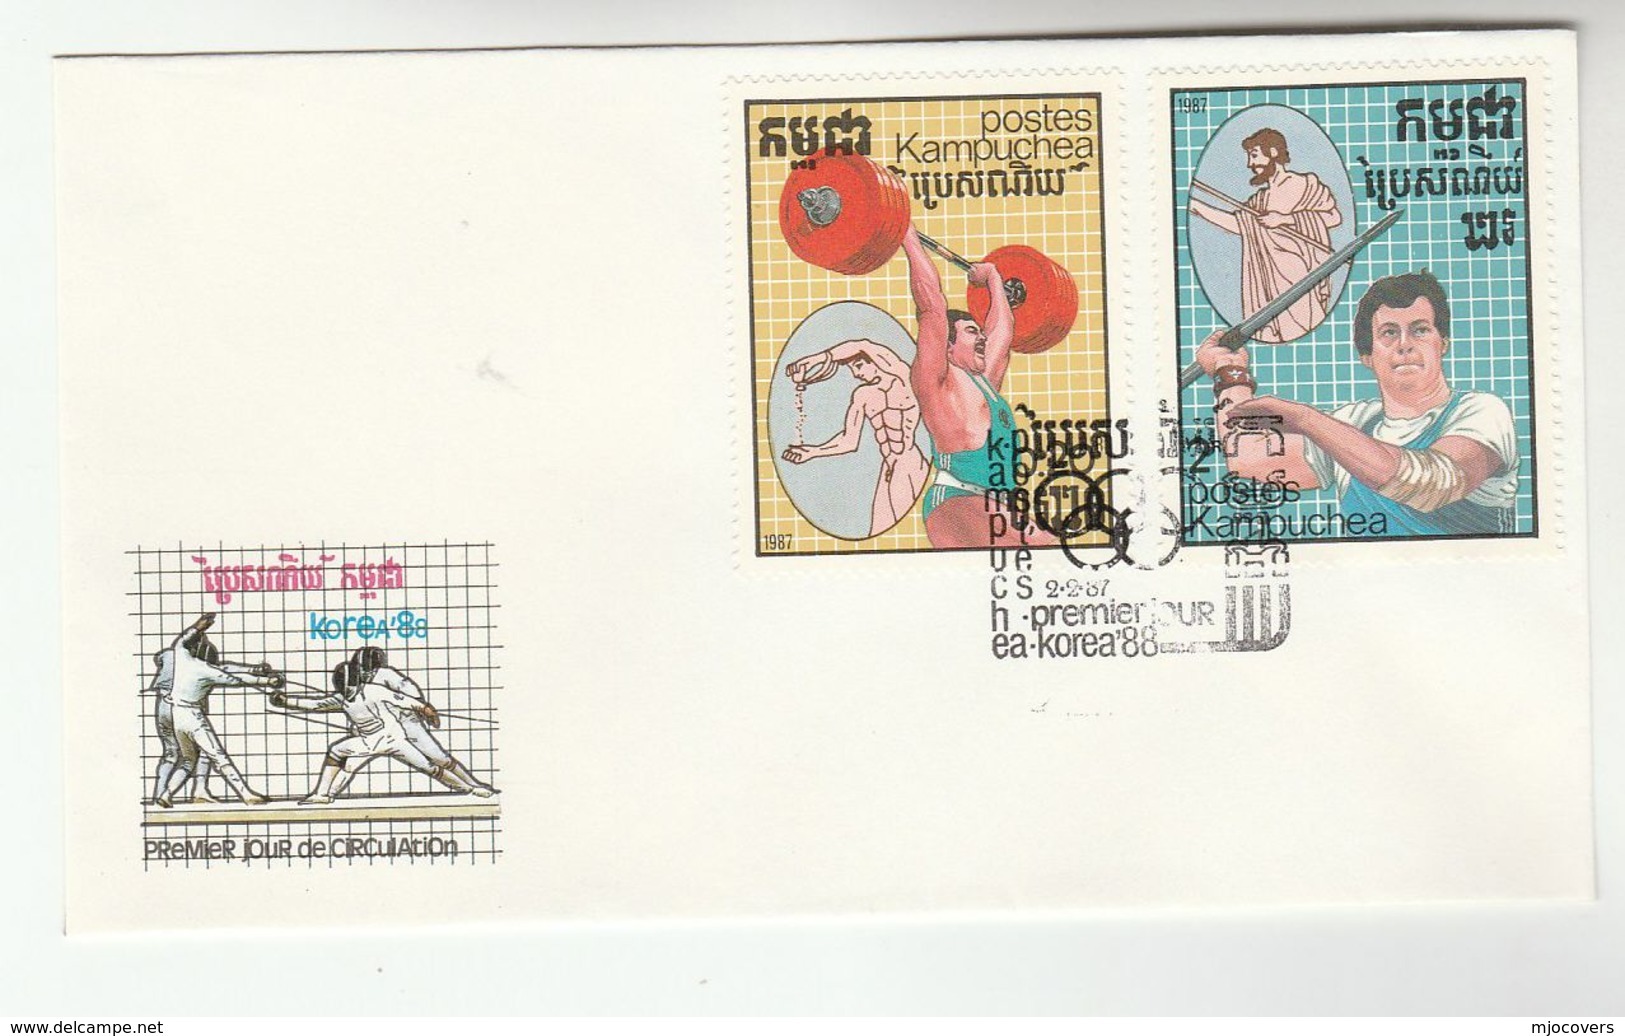 1988 KAMPUCHEA Cambodia FDC Stamps OLYMPICS WEIGHTLIFTING JAVELIN  Cover Nude Sport Olympic Games - Verano 1988: Seúl